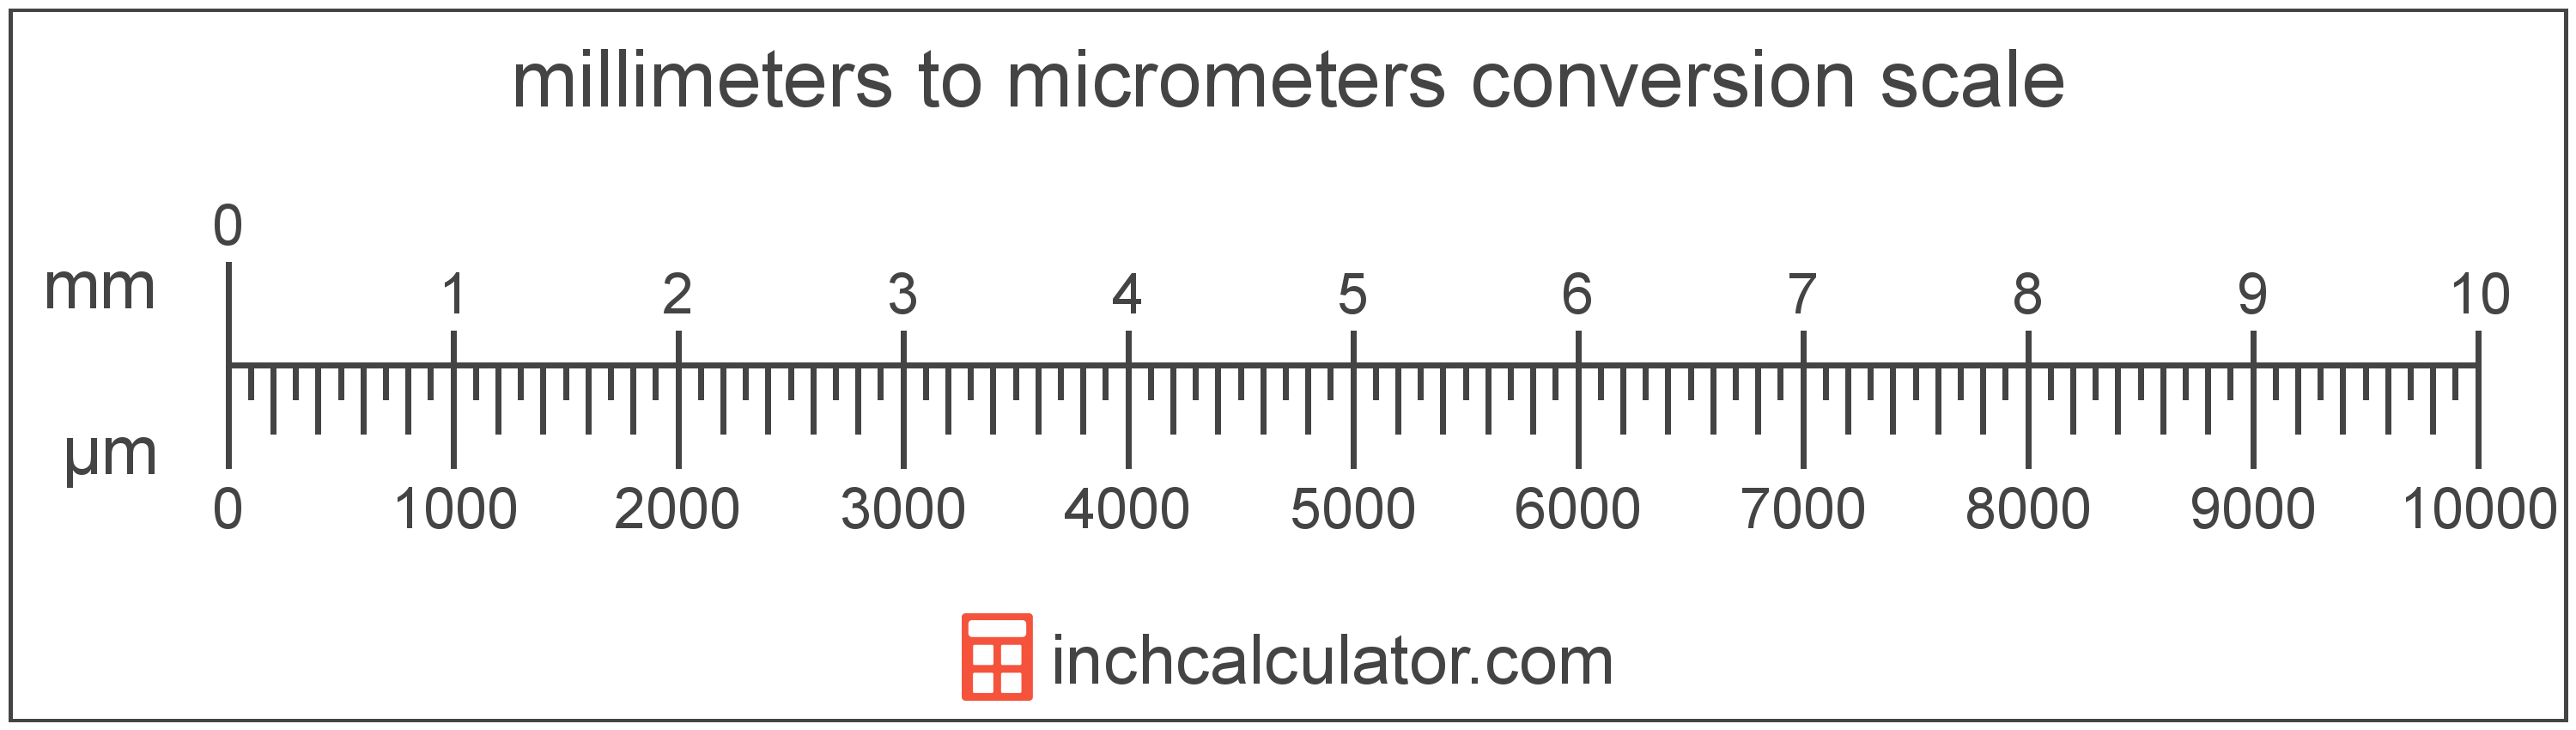 conversion scale showing micrometers and equivalent millimeters length values